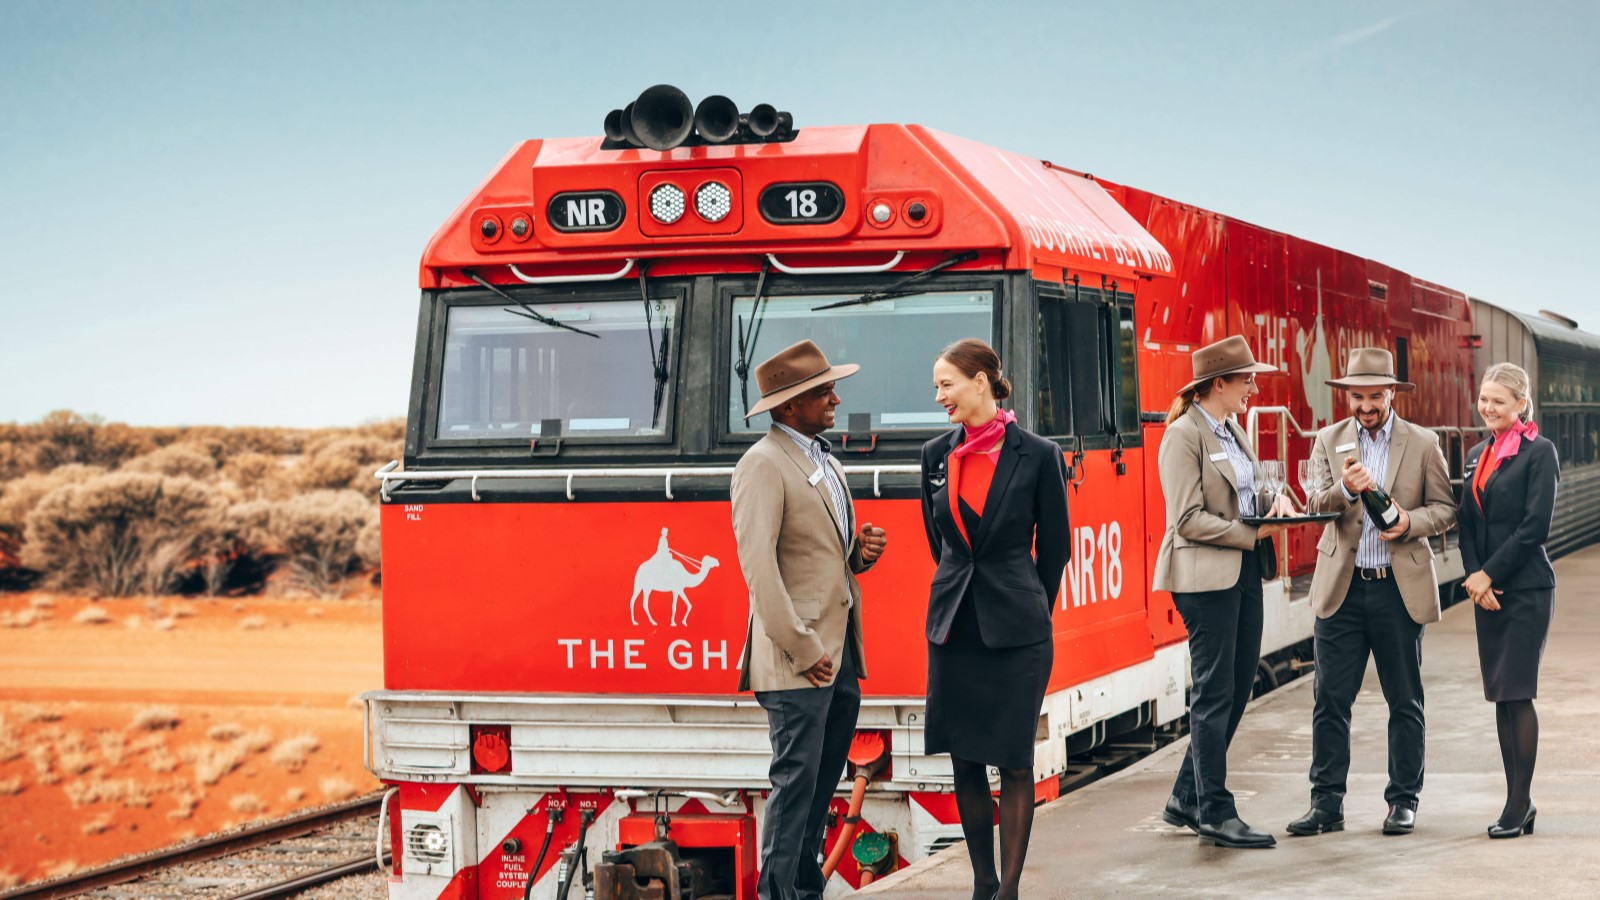 Qantas and The Ghan crew